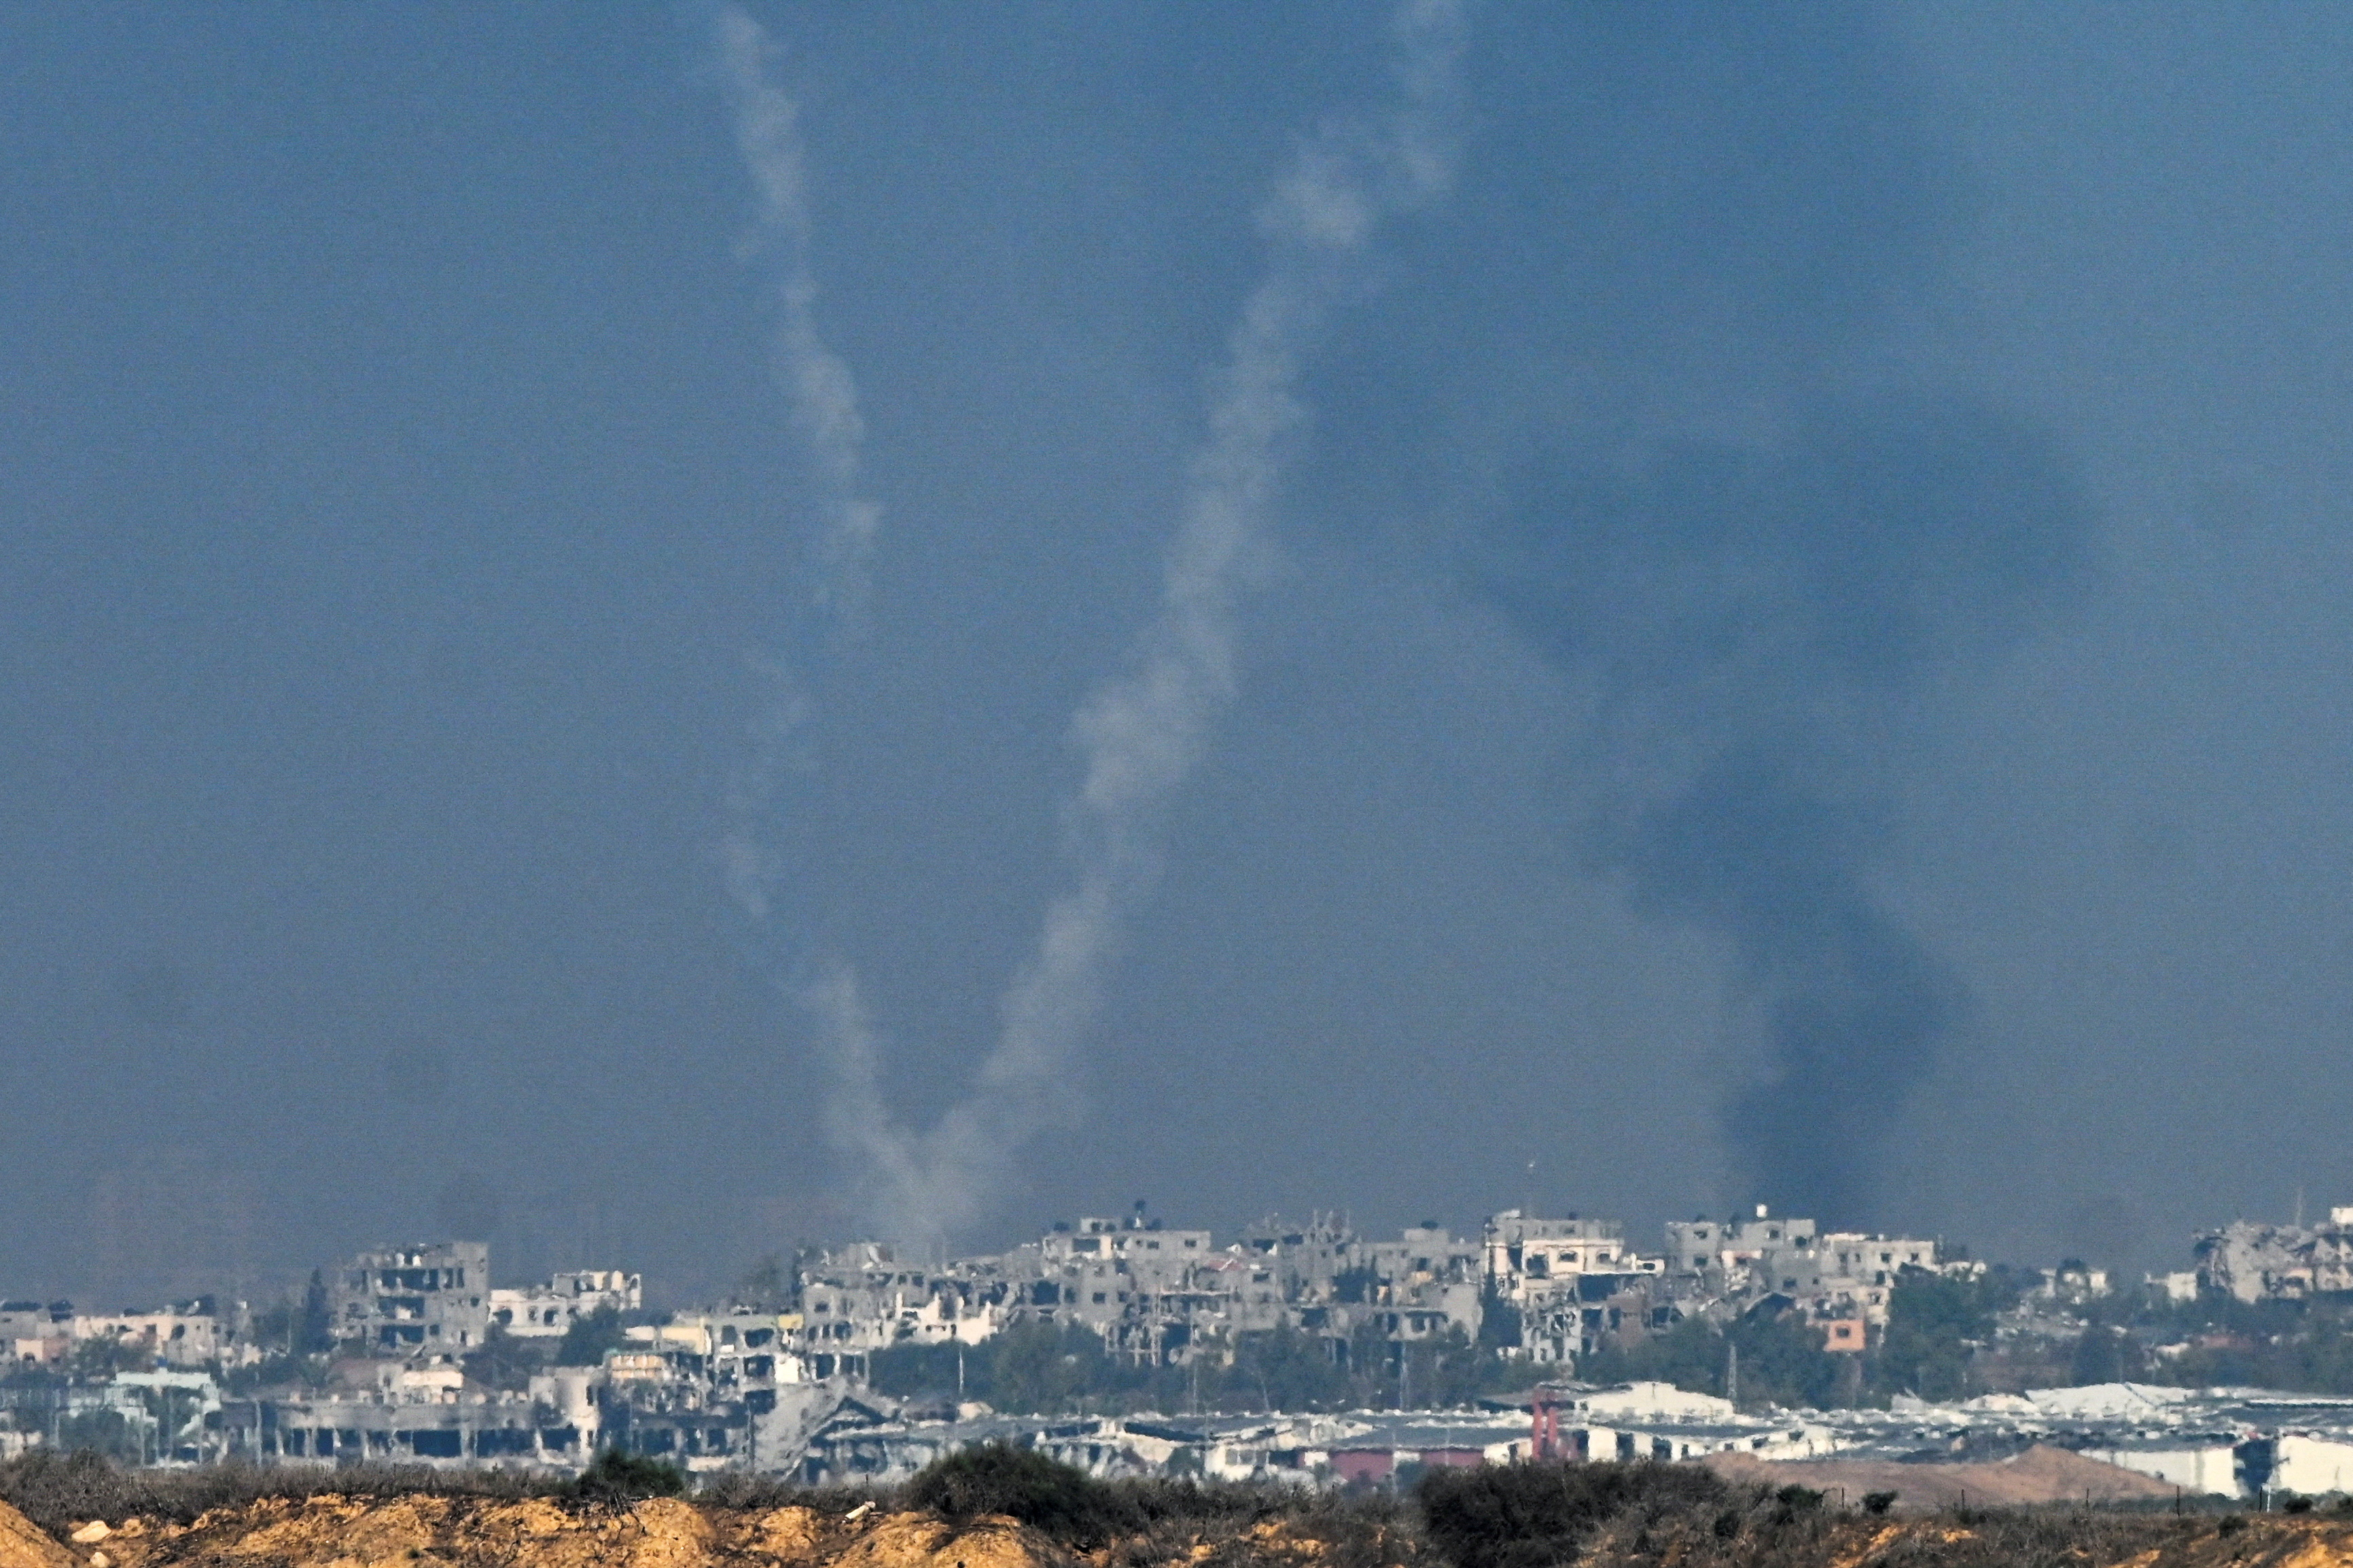 Rockets are launched from the Gaza Strip into Israel, after a temporary truce between Israel and the Palestinian Islamist group Hamas expired, as seen from Israel's border with Gaza in southern Israel